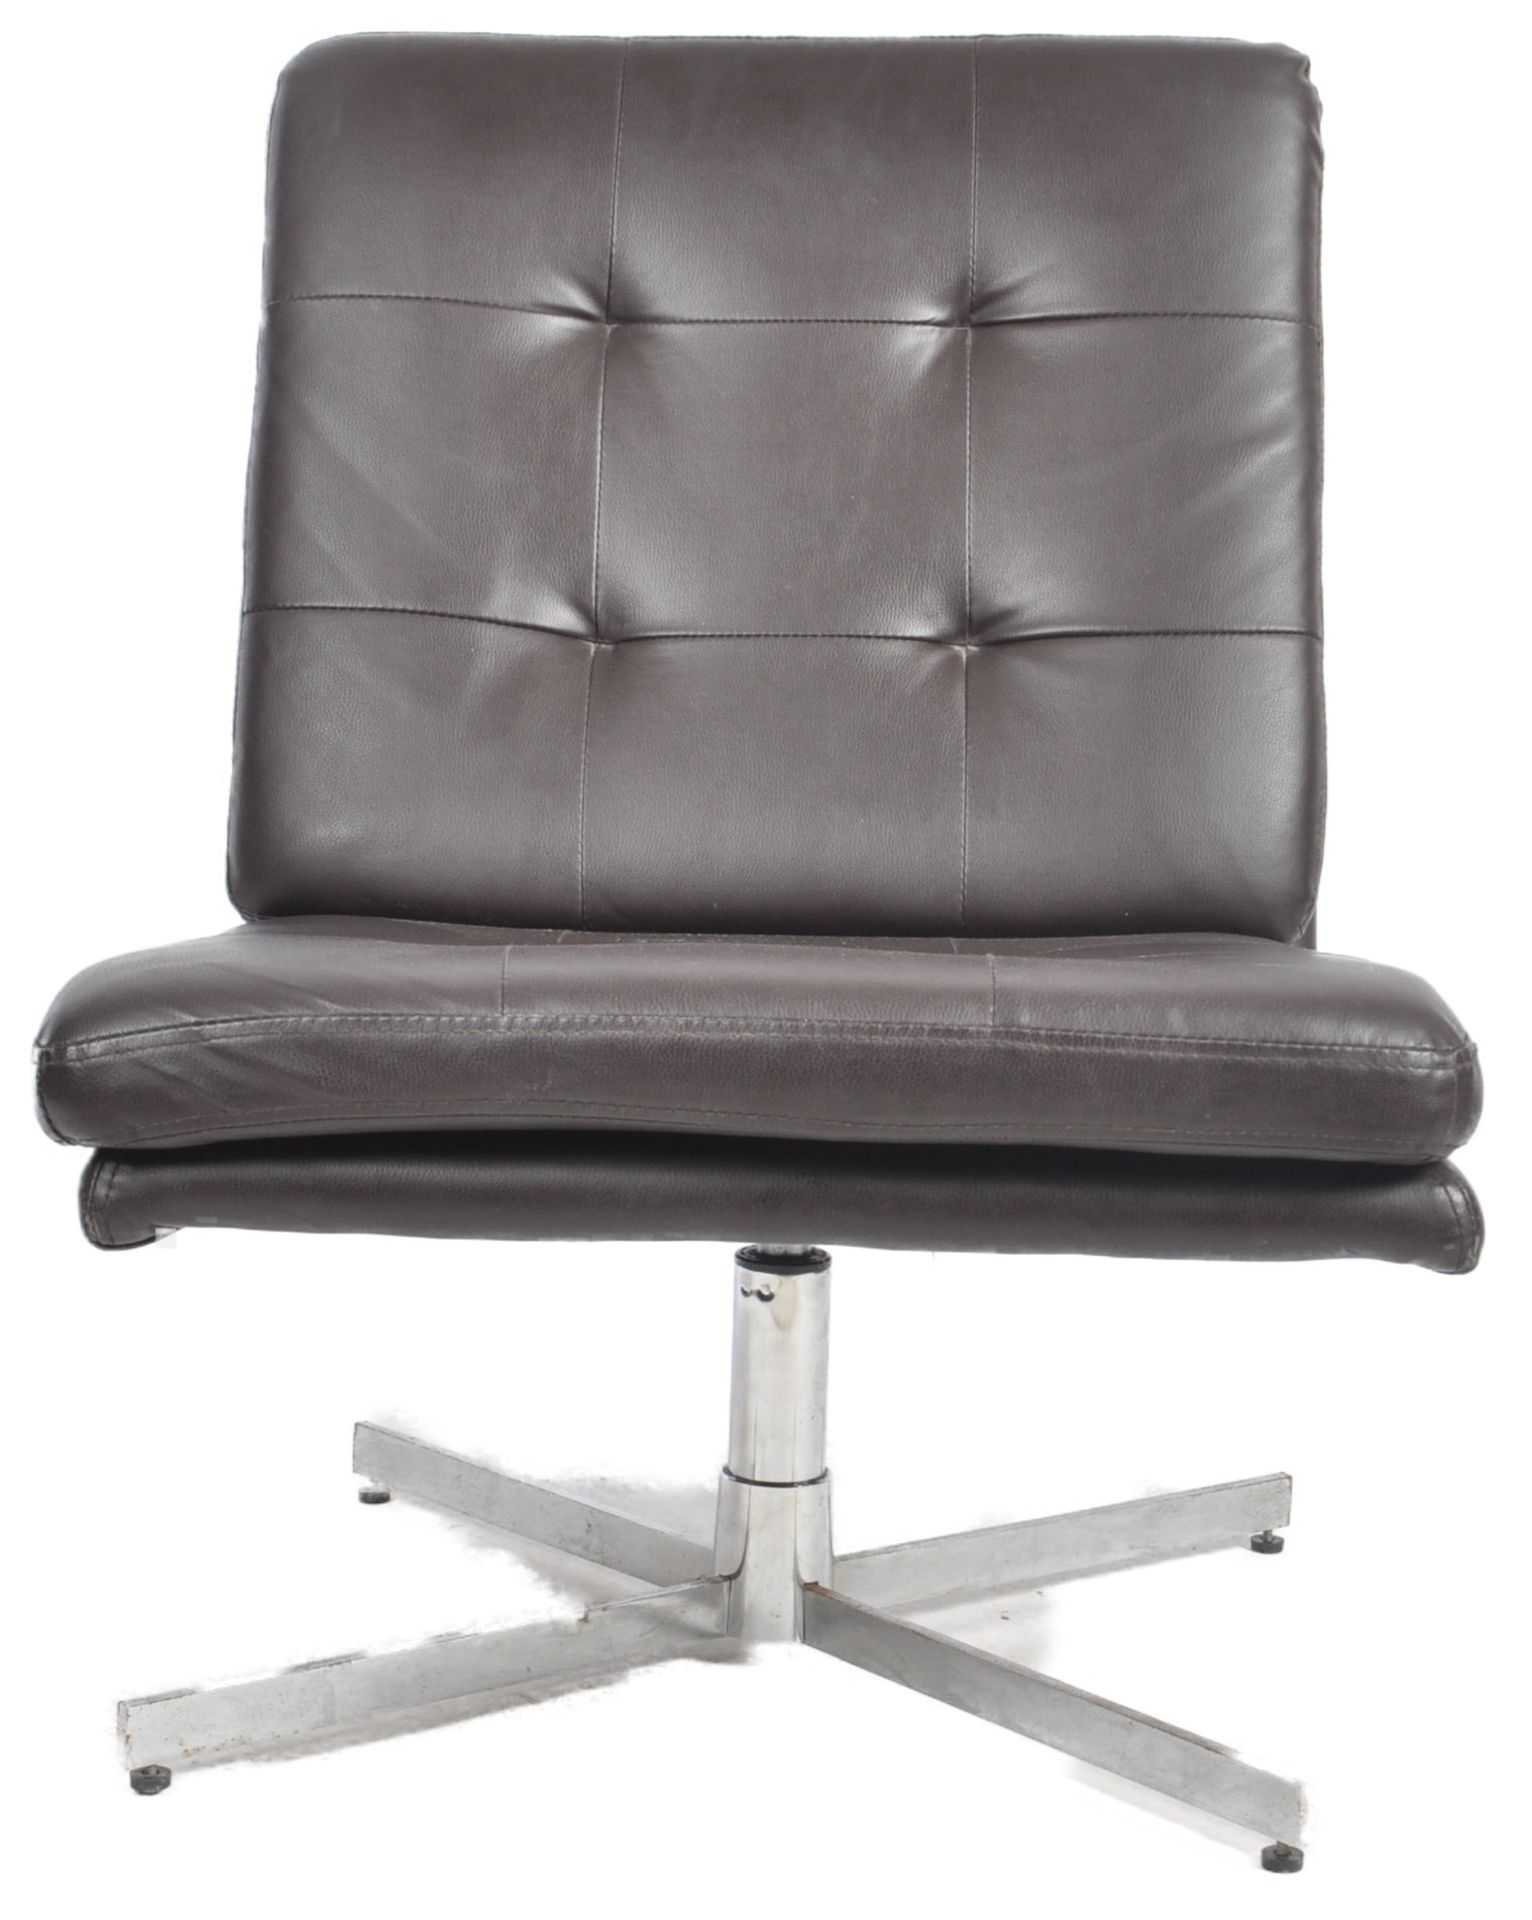 CONTEMPORARY DARK BROWN LEATHER LOUNGE CHAIR